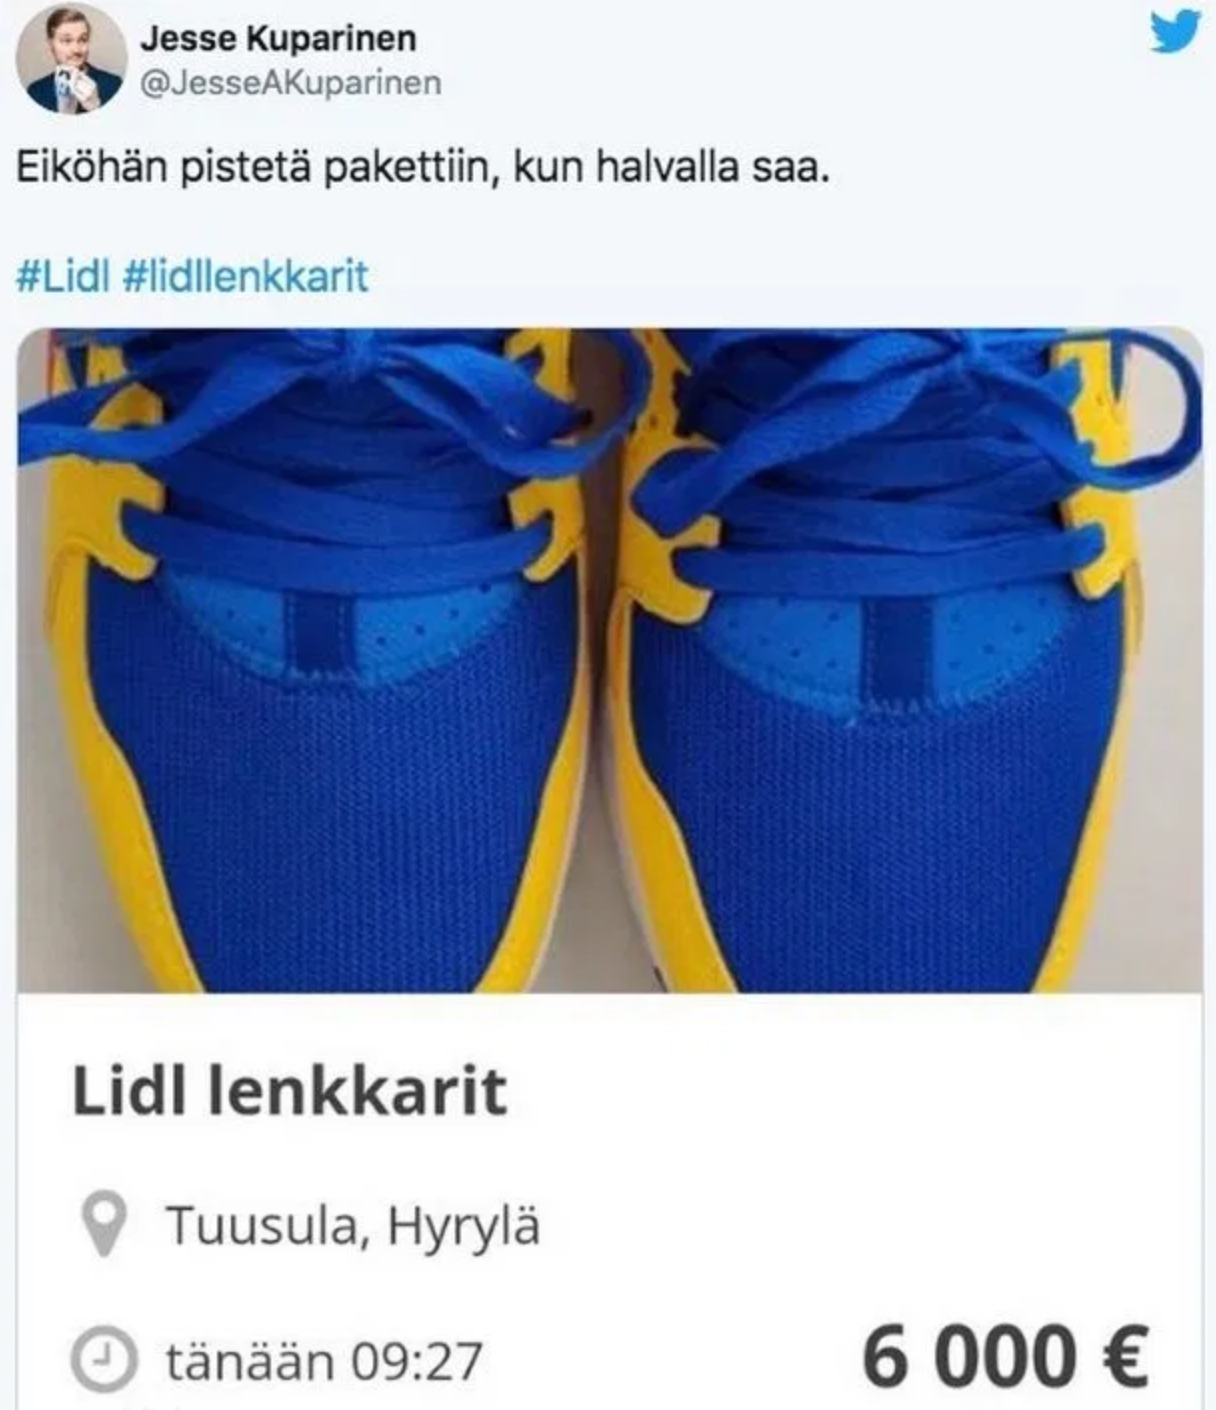 LIDL Sneakers: How Their Limited Edition Sold for $6,700 on eBay | Better  Marketing